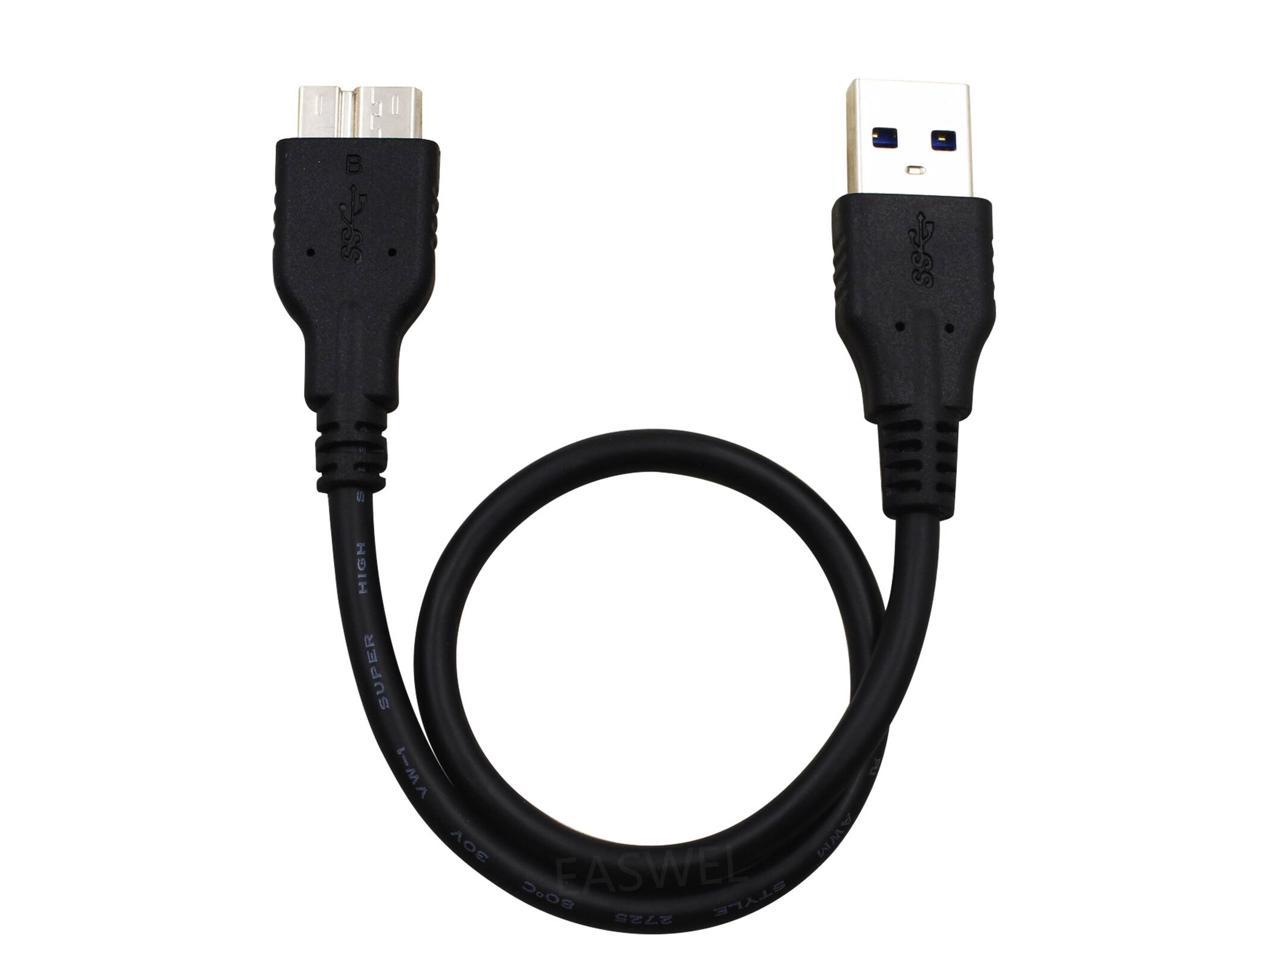 Generic Jimier CABLECC Right Angled 90 Degree USB-C Type-C to USB 2.0 Female OTG Cable for Cell Phone Tablet & Laptop Black 